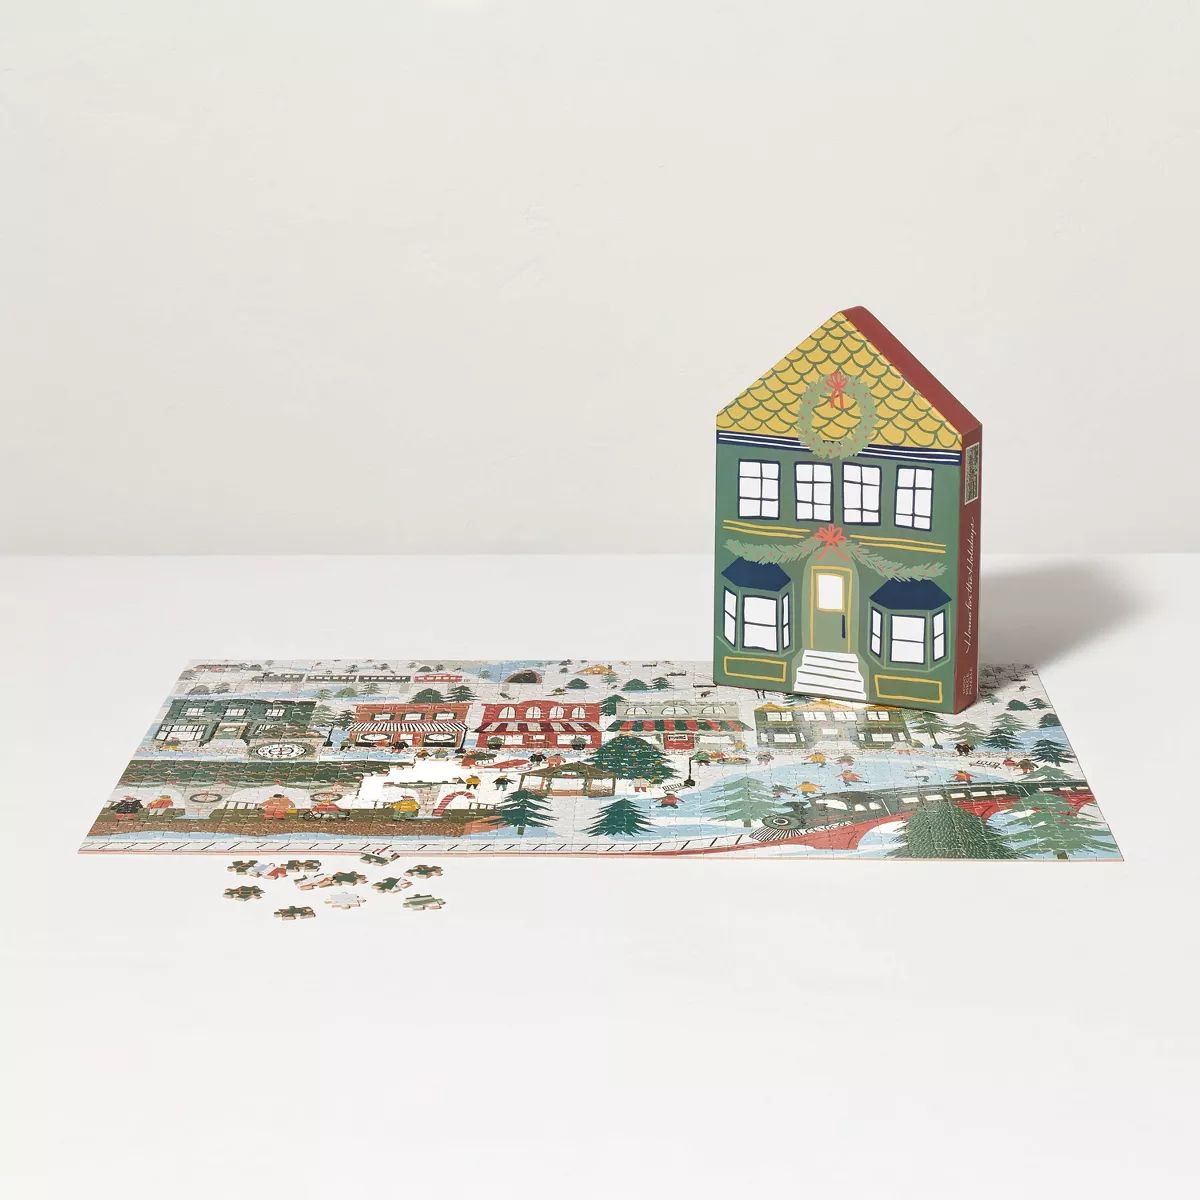 Home for the Holidays Christmas Jigsaw Puzzle - 1000pc - Hearth & Hand™ with Magnolia | Target